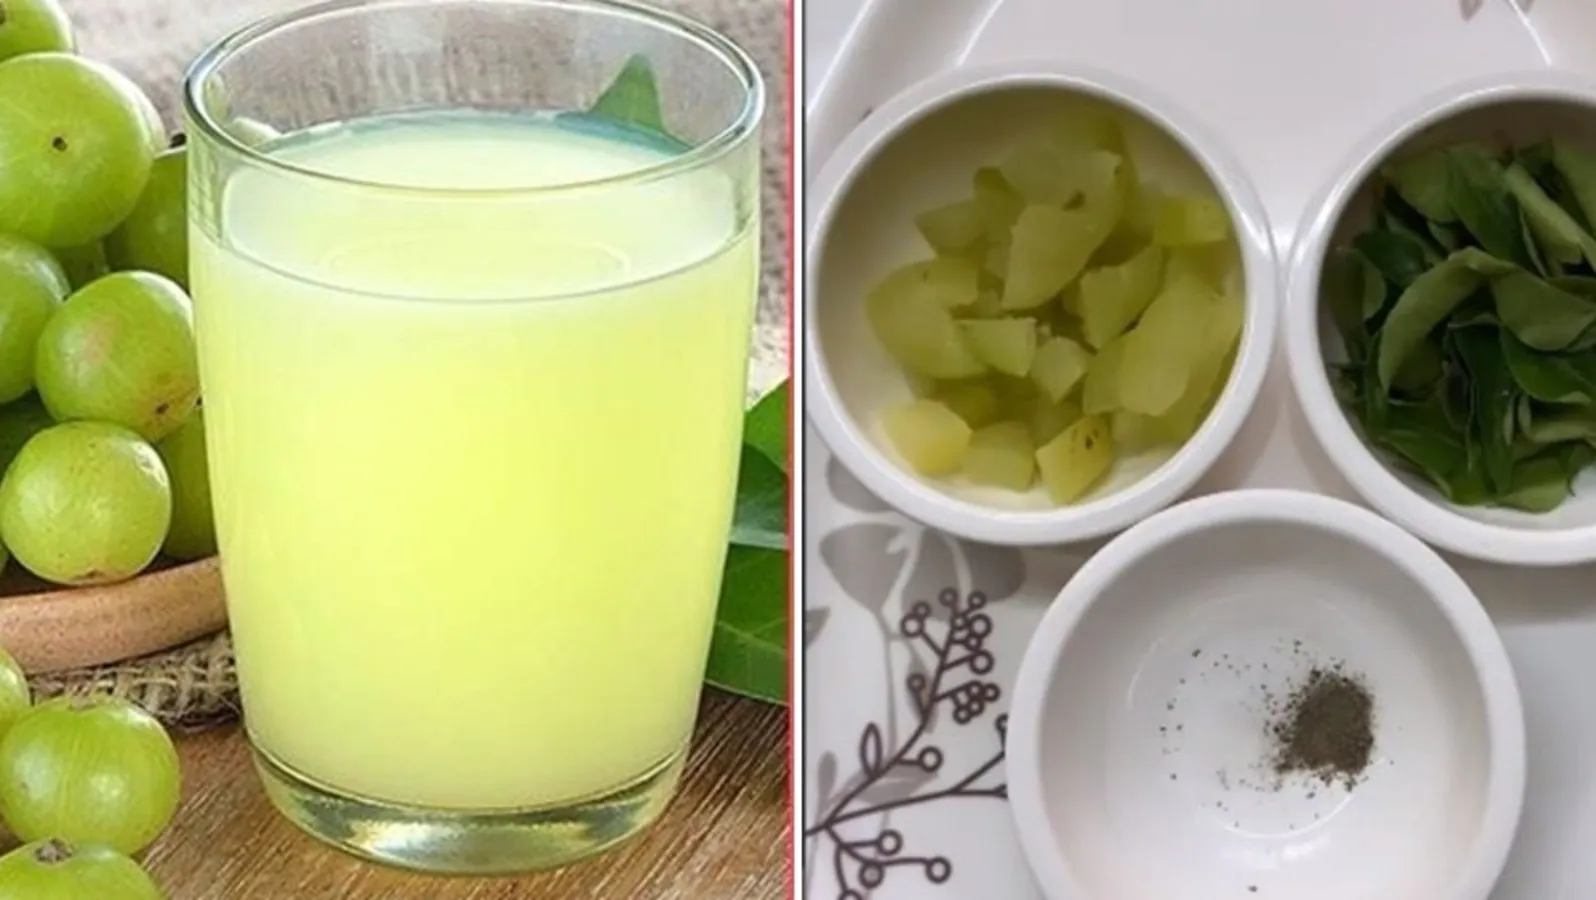 Prevent excessive hair fall with this amla curry leaves shot; recipe inside